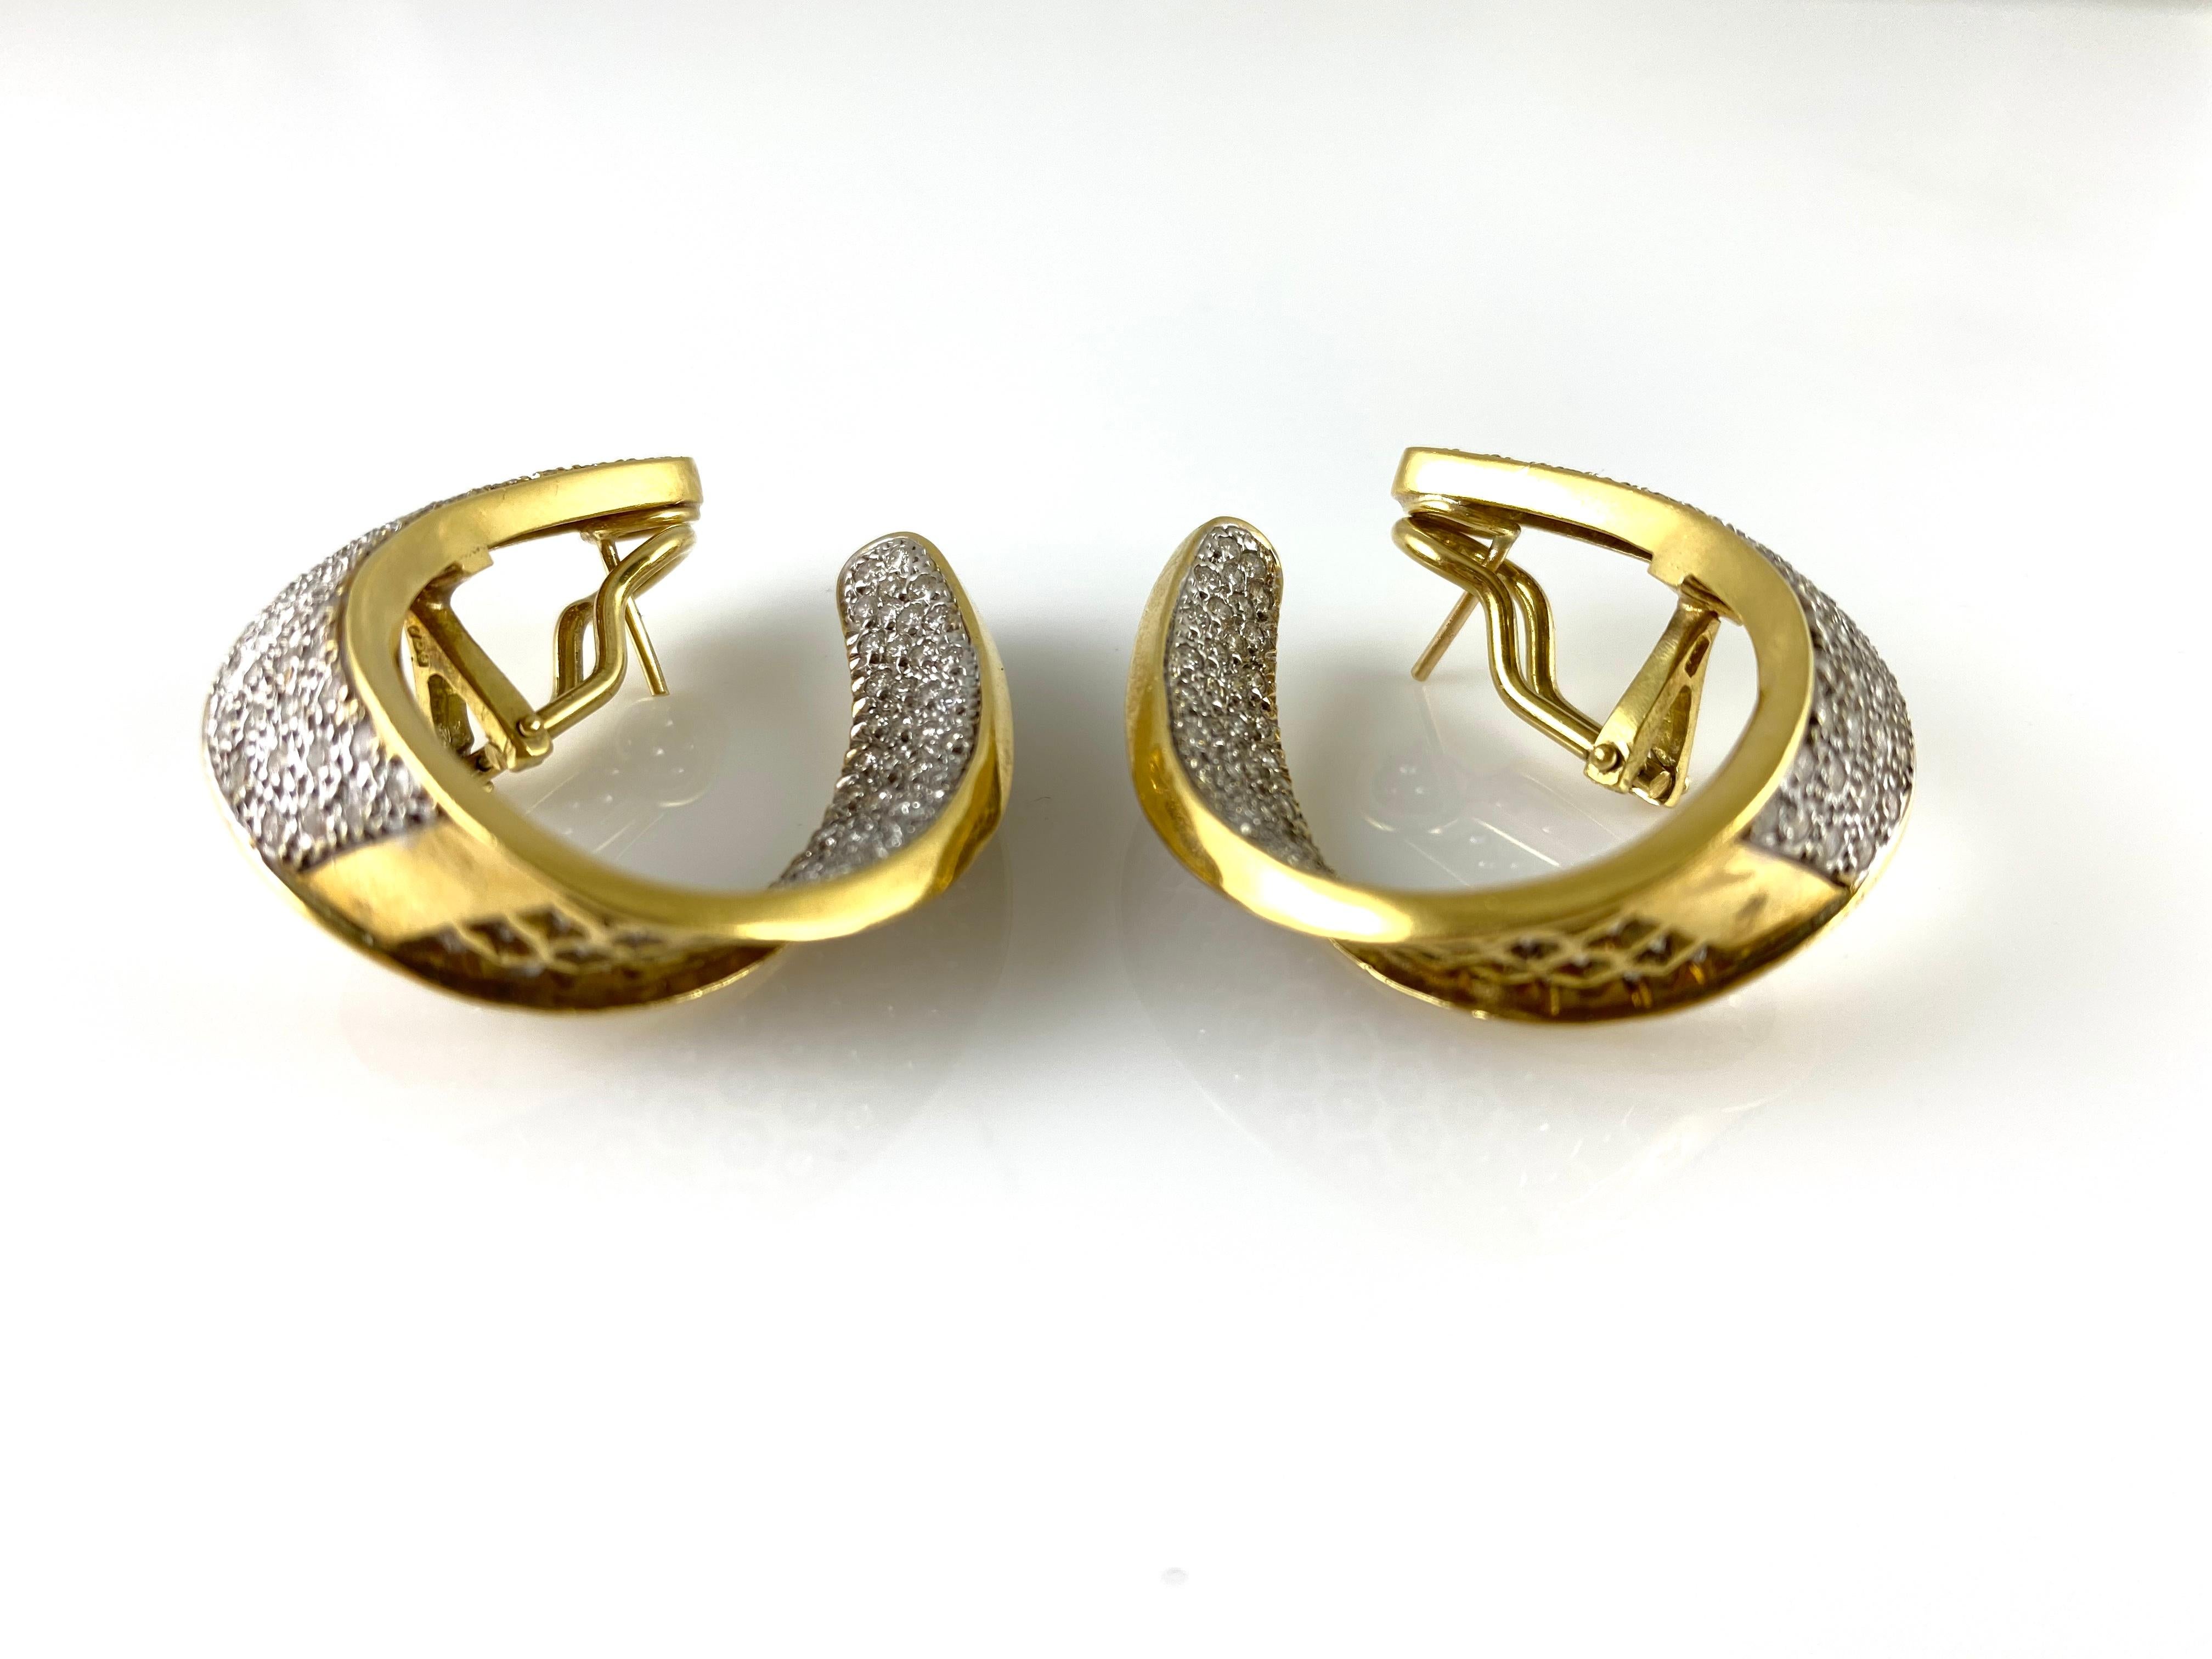 The earring is finely crafted in 18k yellow gold with diamonds weighing approximately total of 5.00 carat.
Circa 1980.